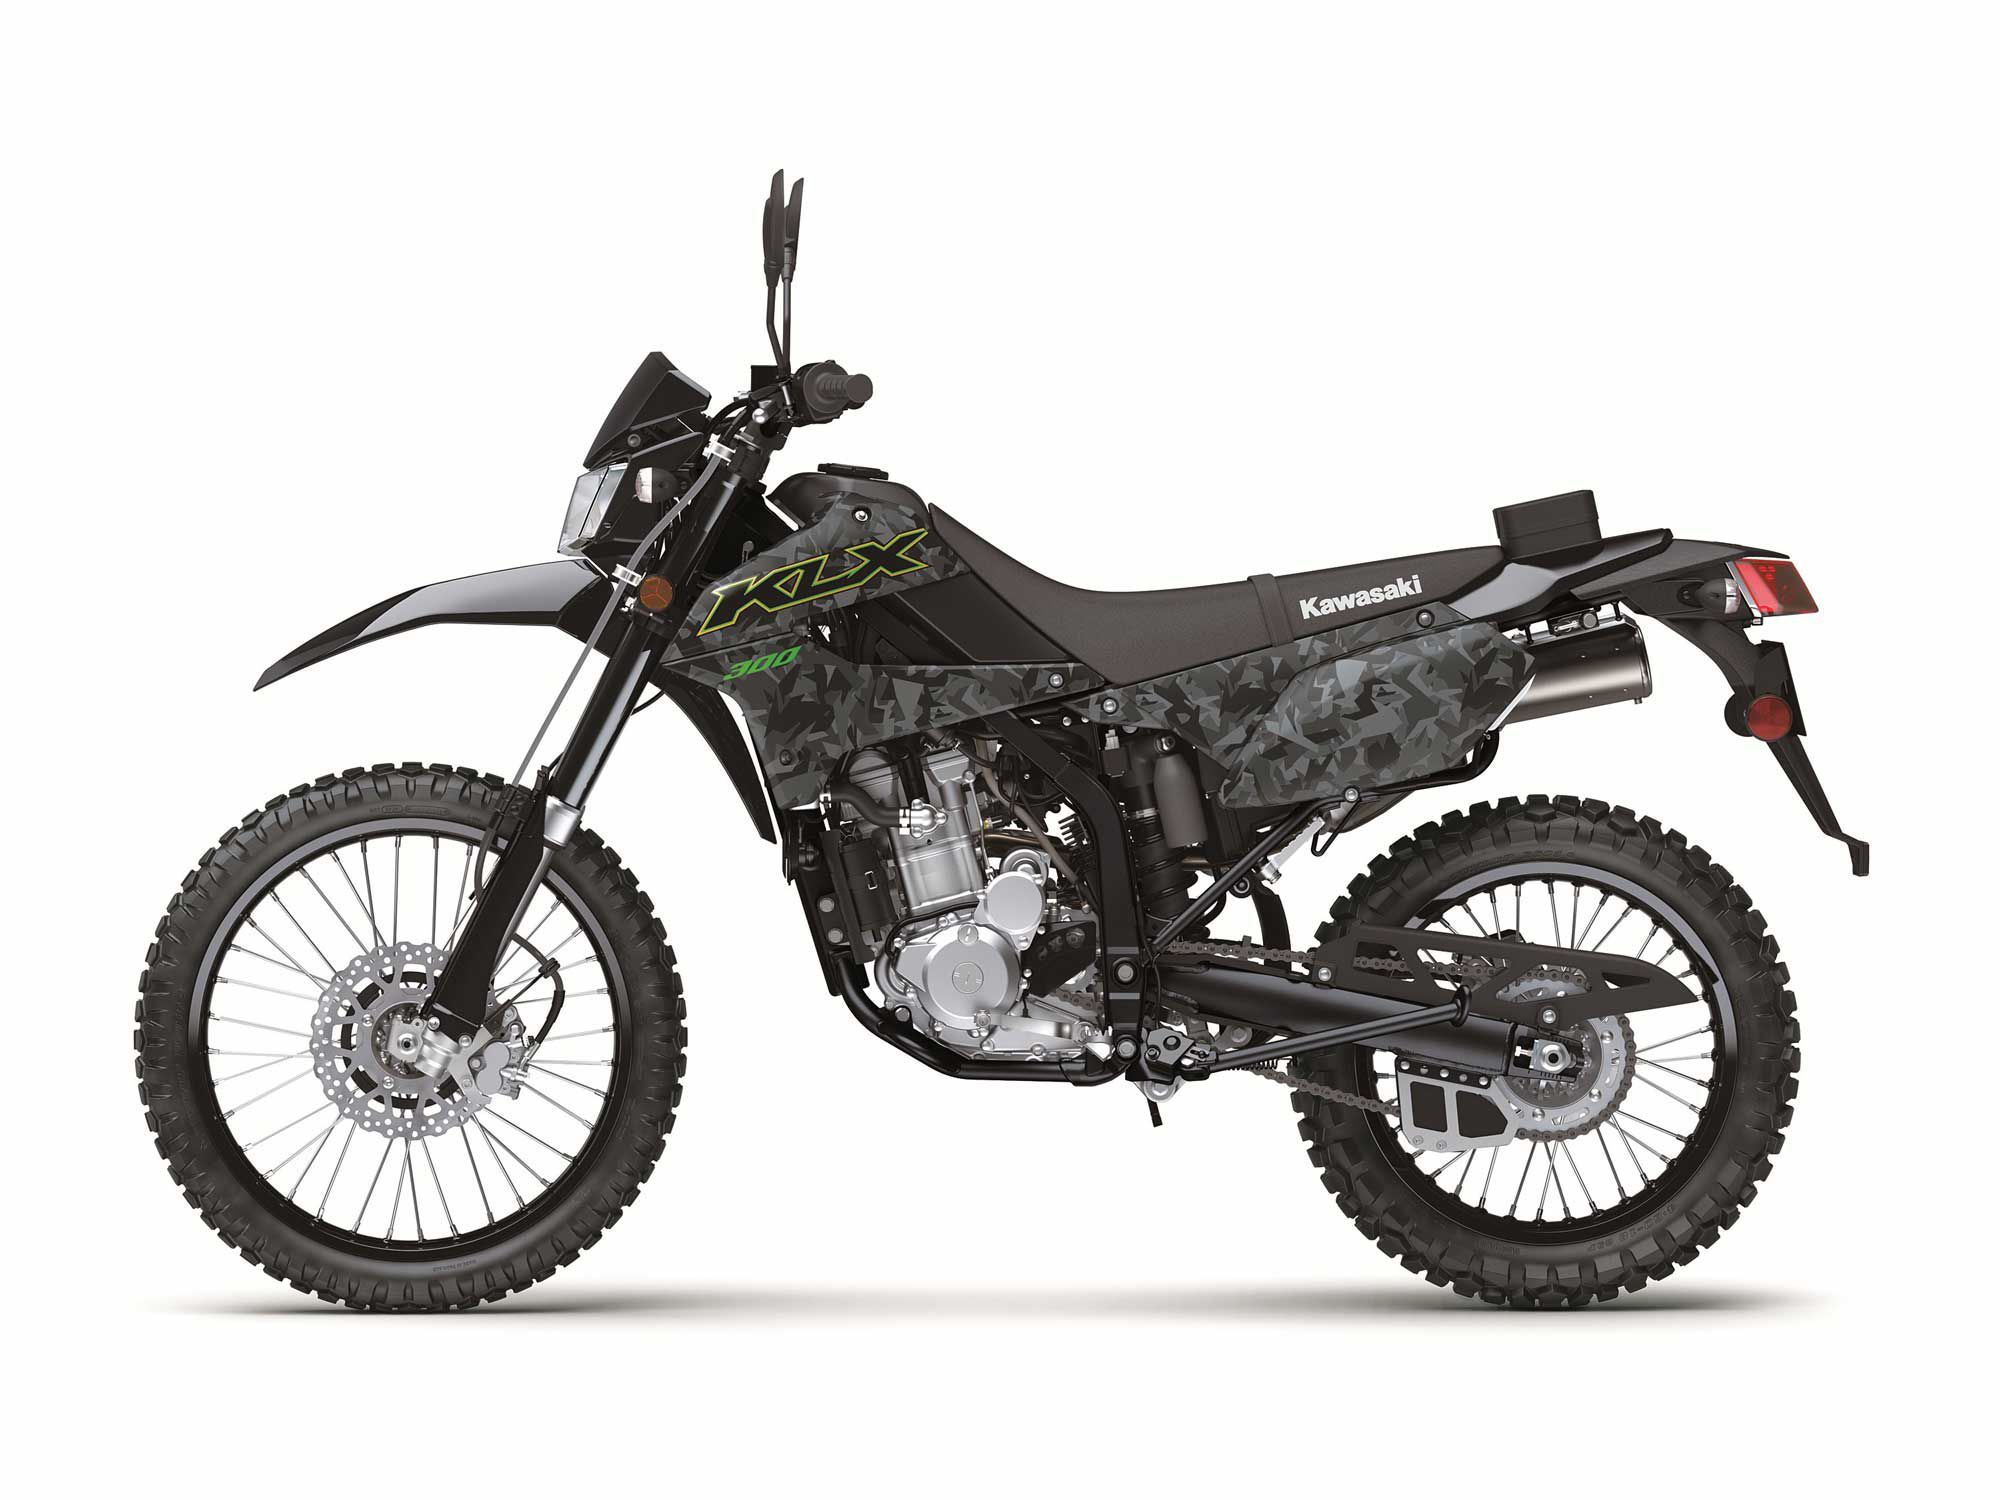 The Fragment Camo Gray colorway adds $200 to the competitively priced KLX300, which aims to be a practical, approachable dual sport for newer riders, local commuters, and those looking to explore nearby single-track.